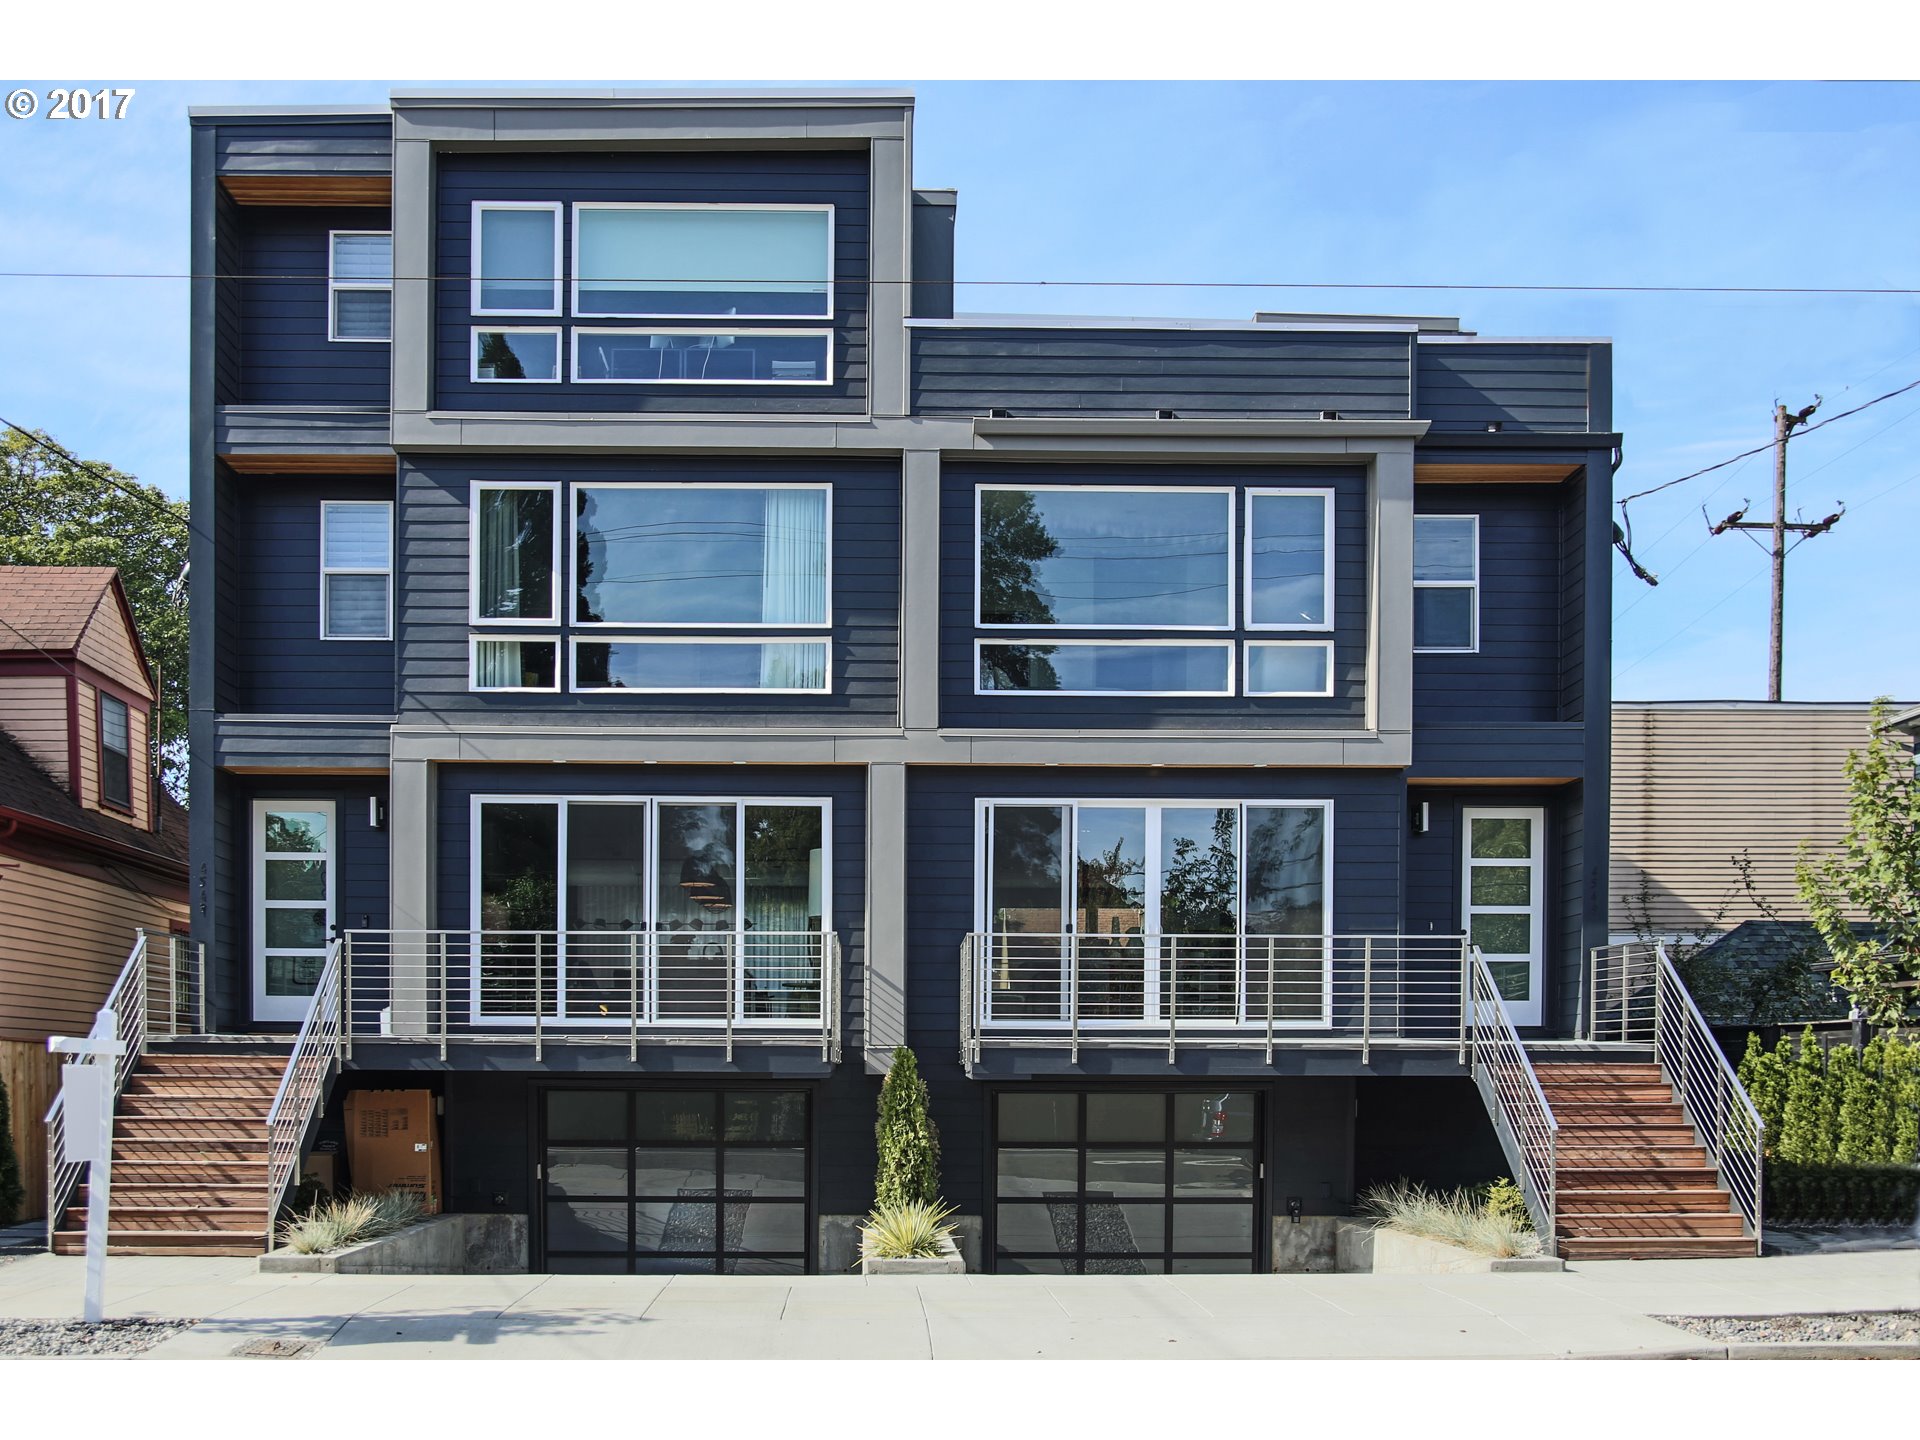 Now Available! 4549 N Williams Ave, Portland. Offered for $999,999